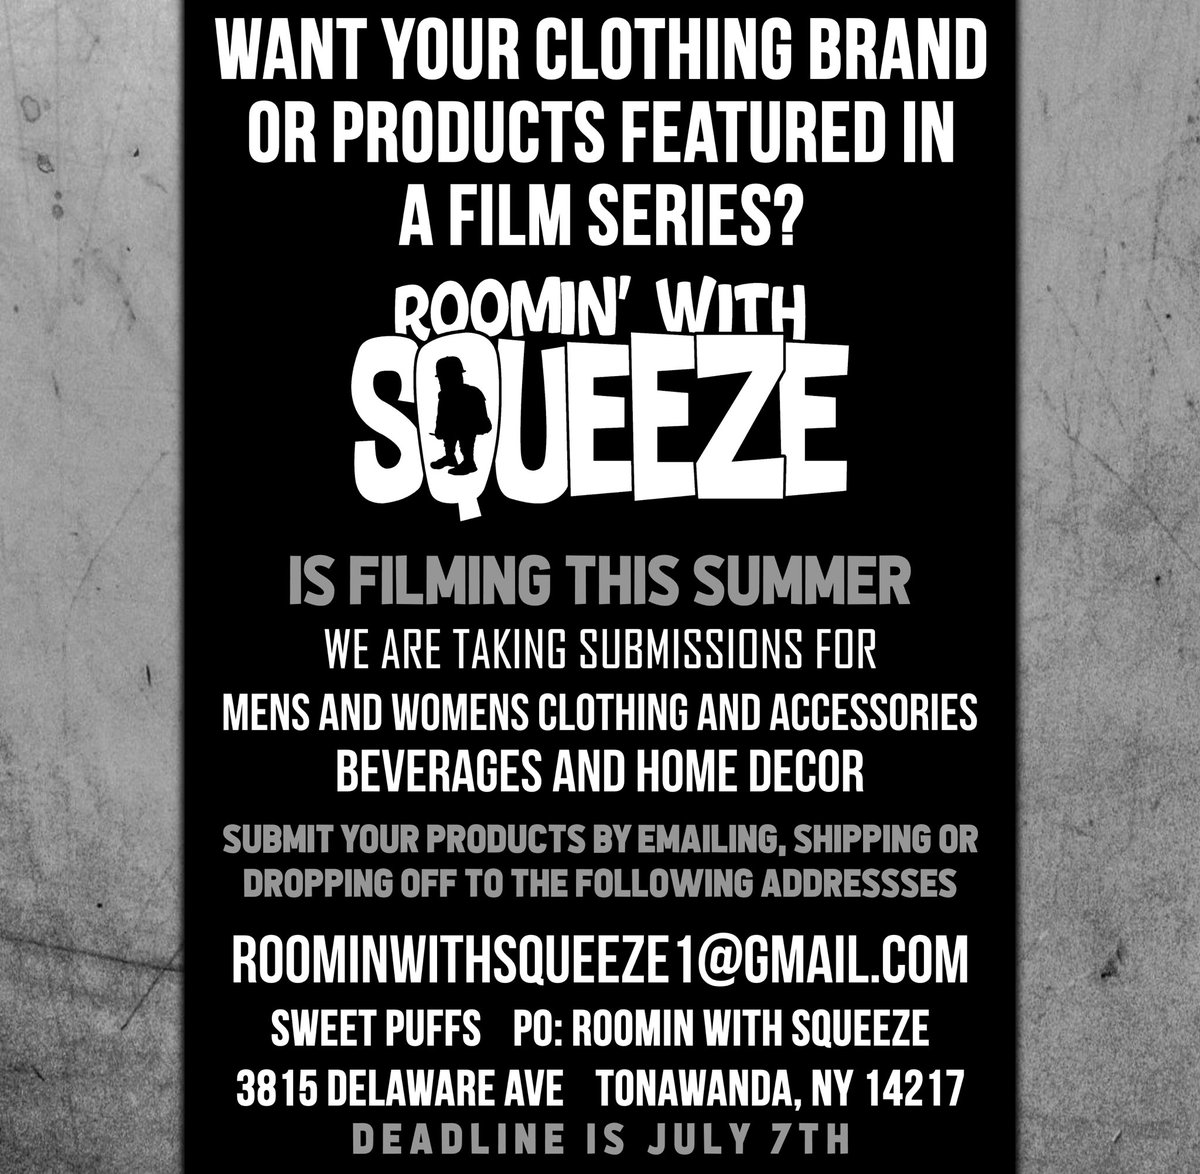 Get your brand featured in a comedy show filming this summer. Adult sizes. Share with local brands you know
#submit #submission #film #movie #series #clothes #clothingbrand #streetwear #fashion #style #fashionblogger #tubi #netflix #hulu #clothingline #boutique #shop #shoplocal